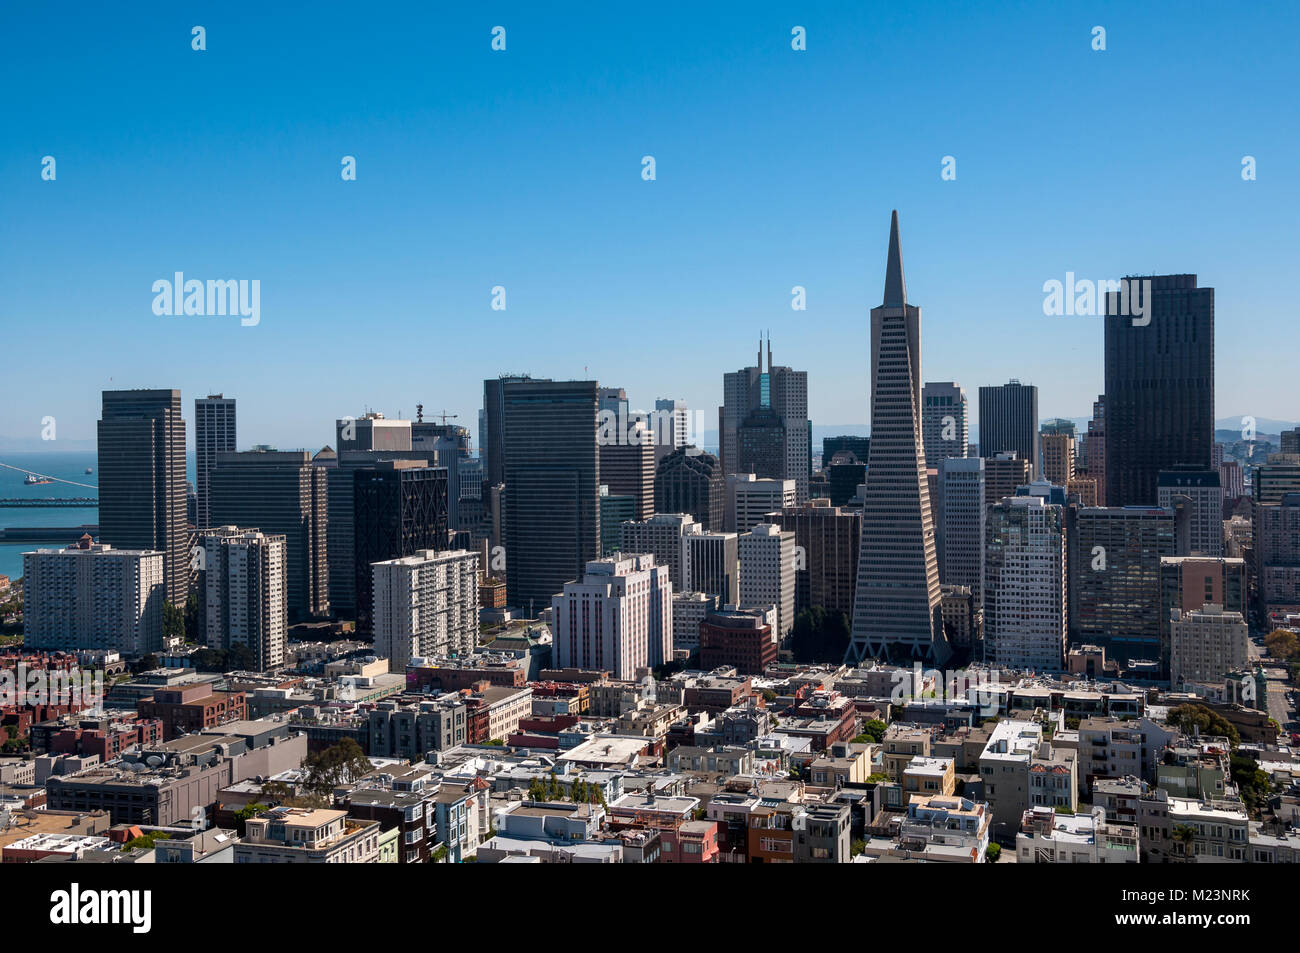 SAN FRANCISCO, CALIFORNIA - SEPTEMBER 9, 2015 - View of the Financial District from Coit Tower Stock Photo